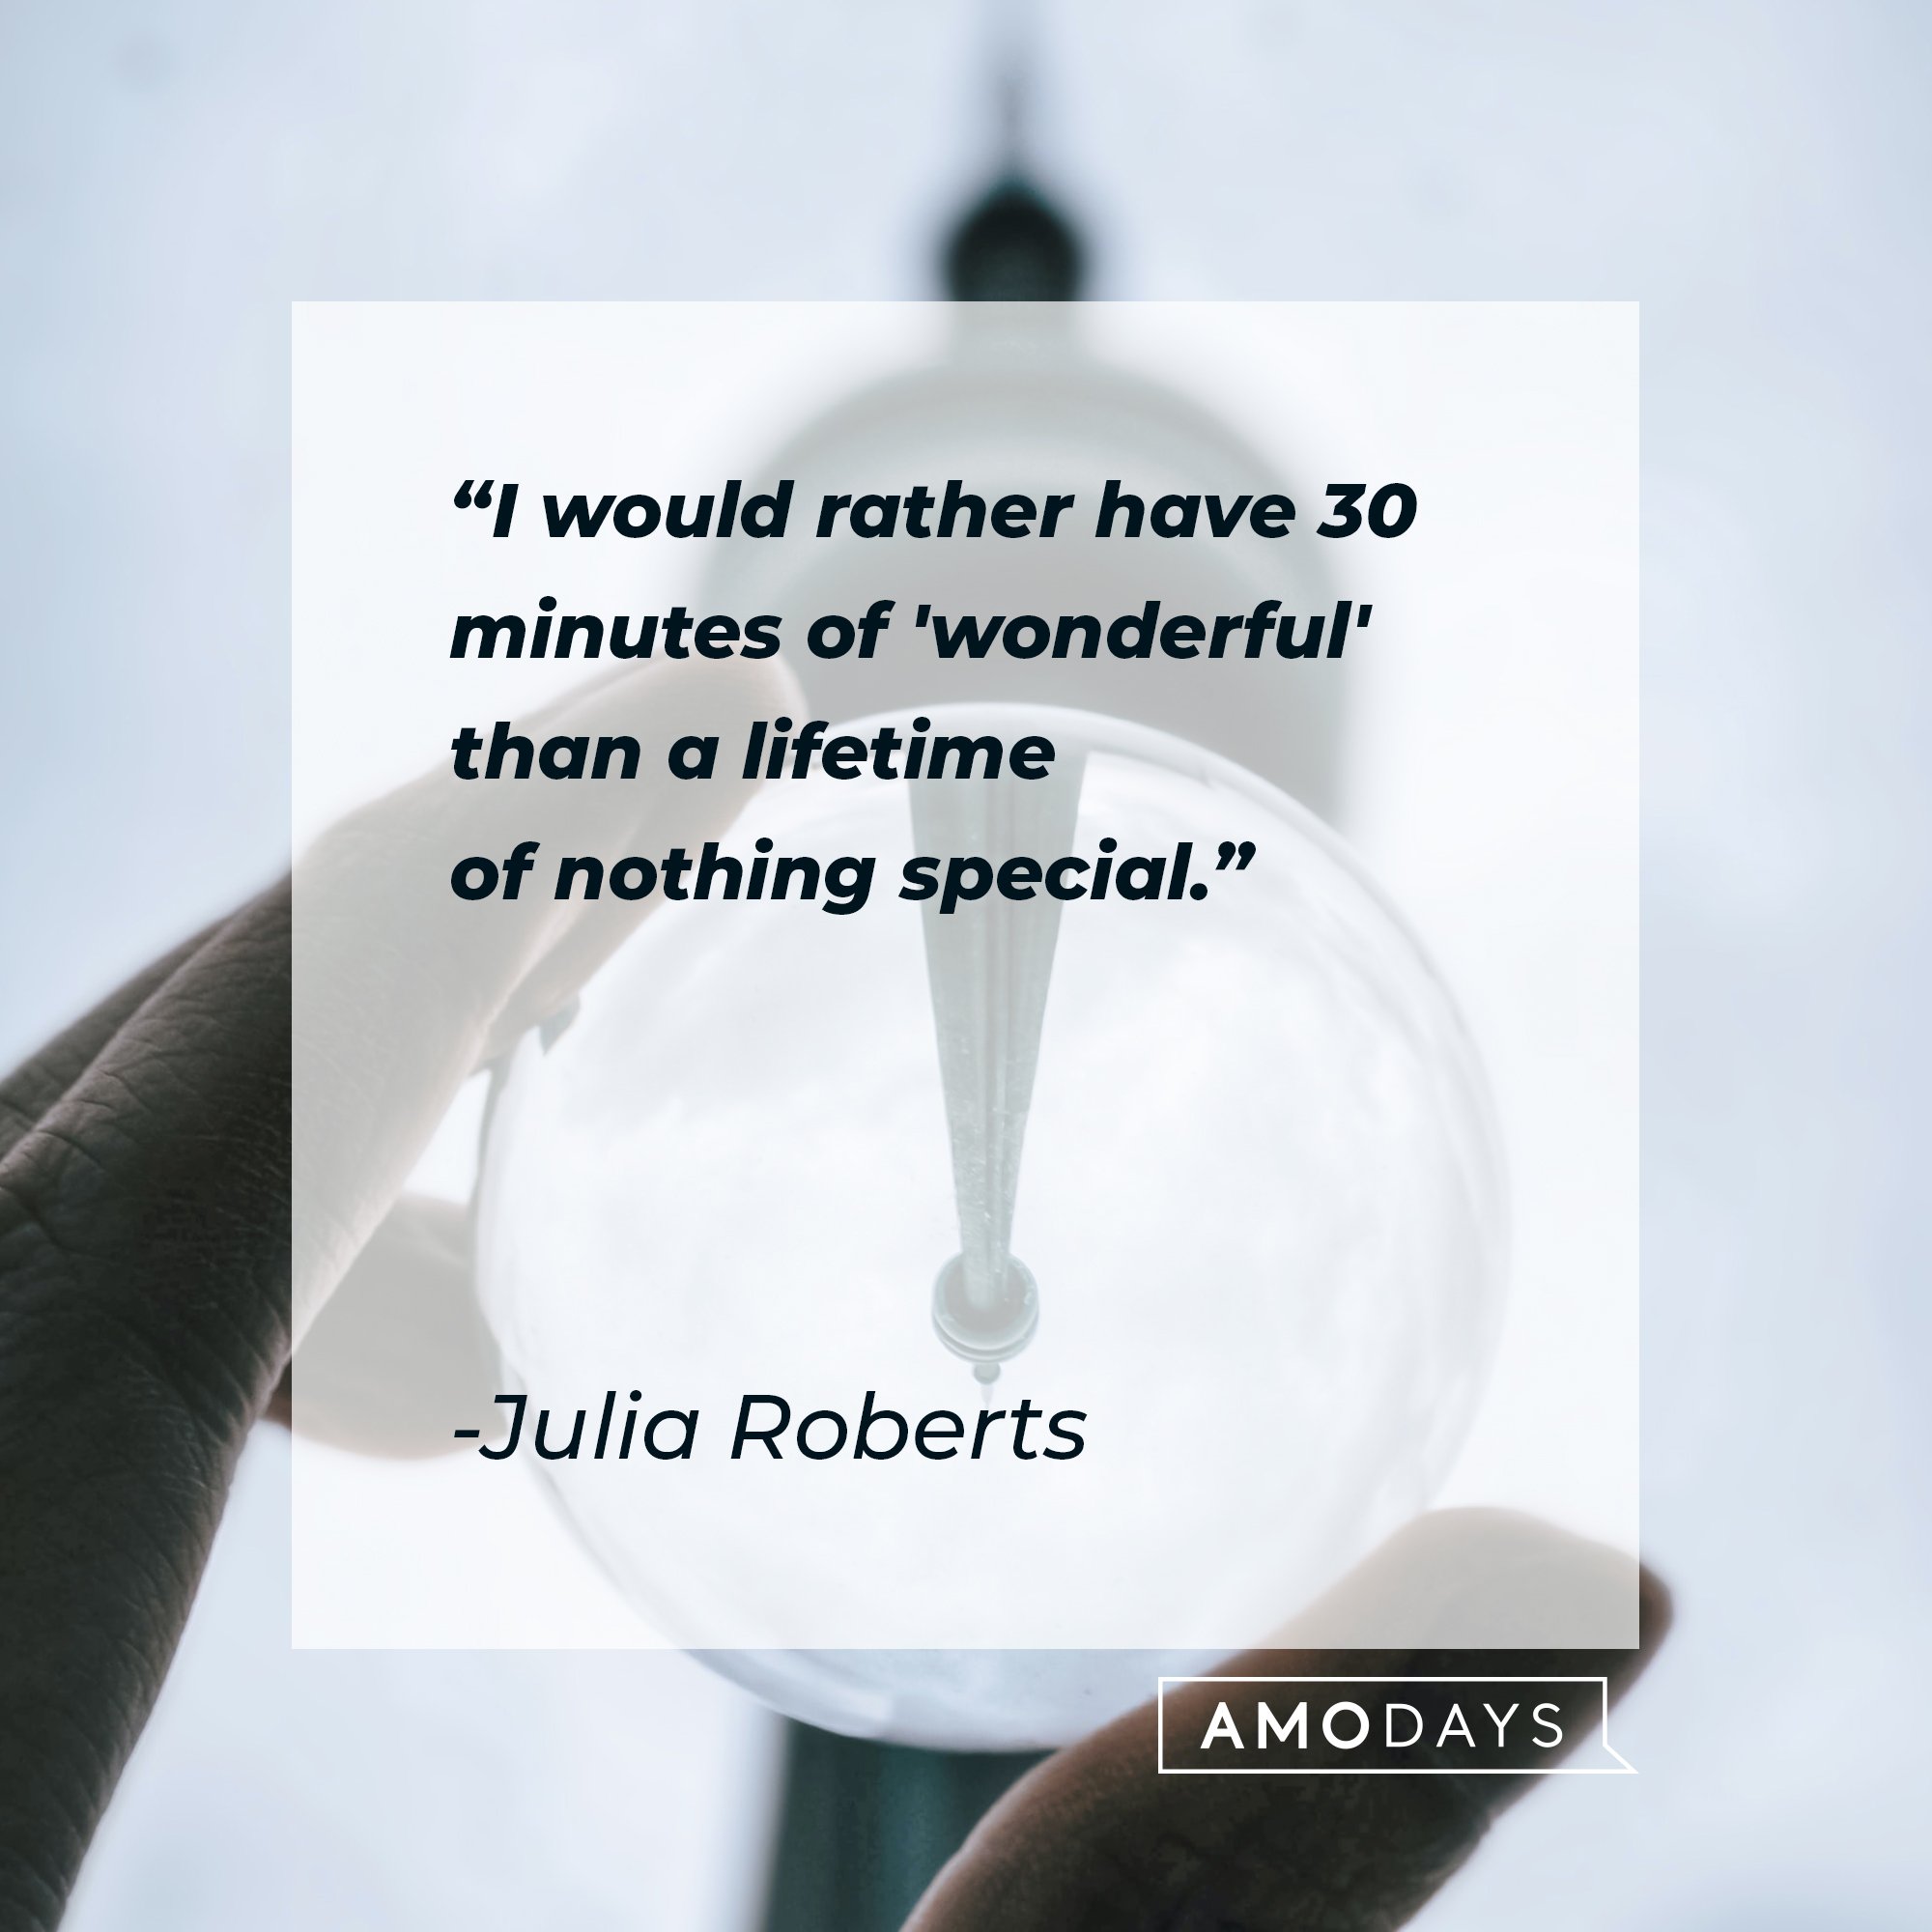 Julia Robert’s quote: "I would rather have 30 minutes of 'wonderful' than a lifetime of nothing special." | Image: AmoDays